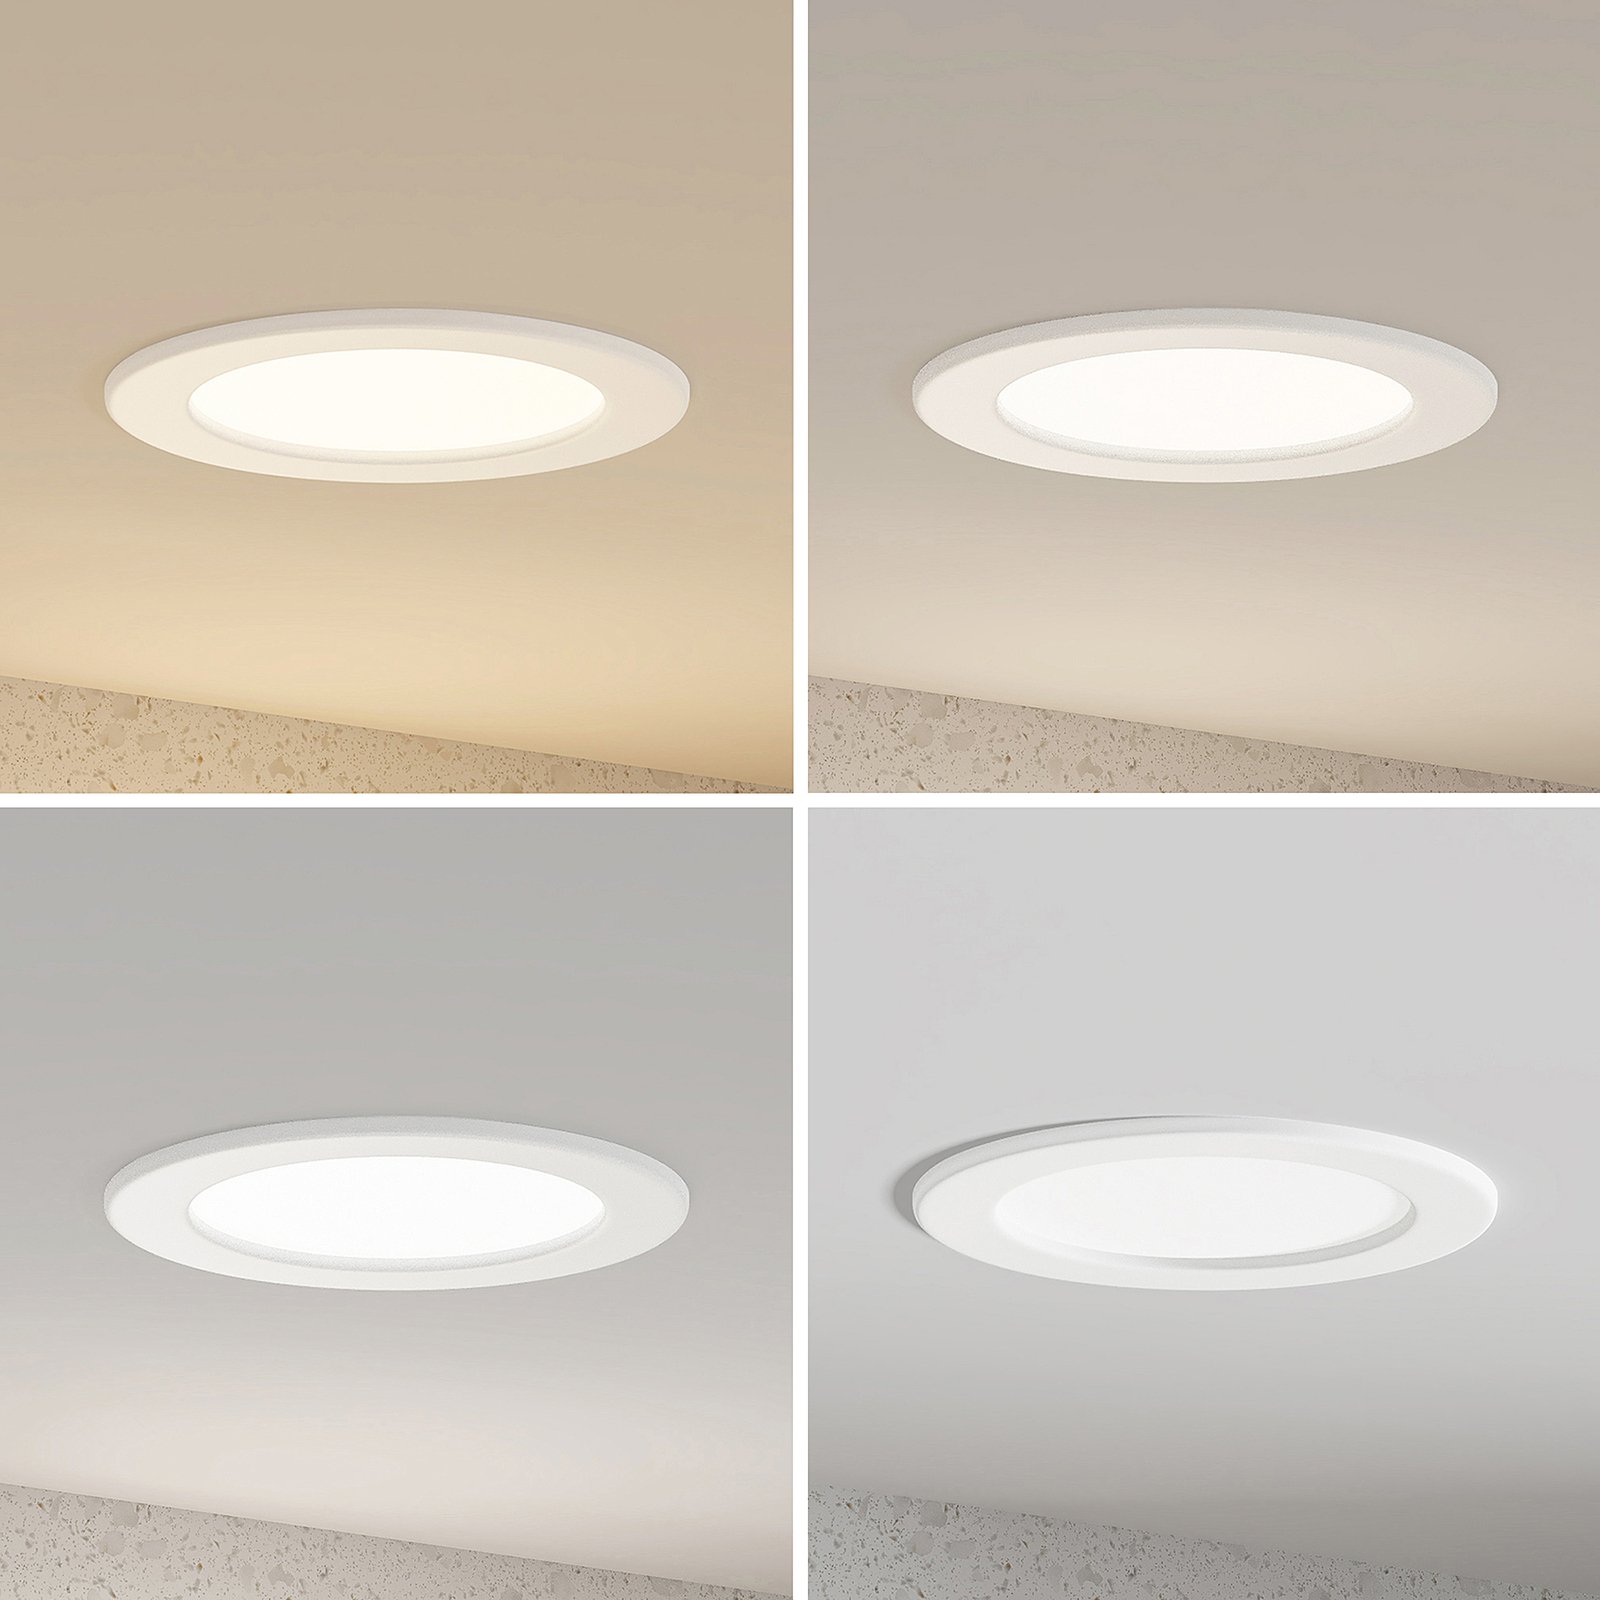 Prios LED recessed light Cadance, white, 17 cm, 3 units, dimmable